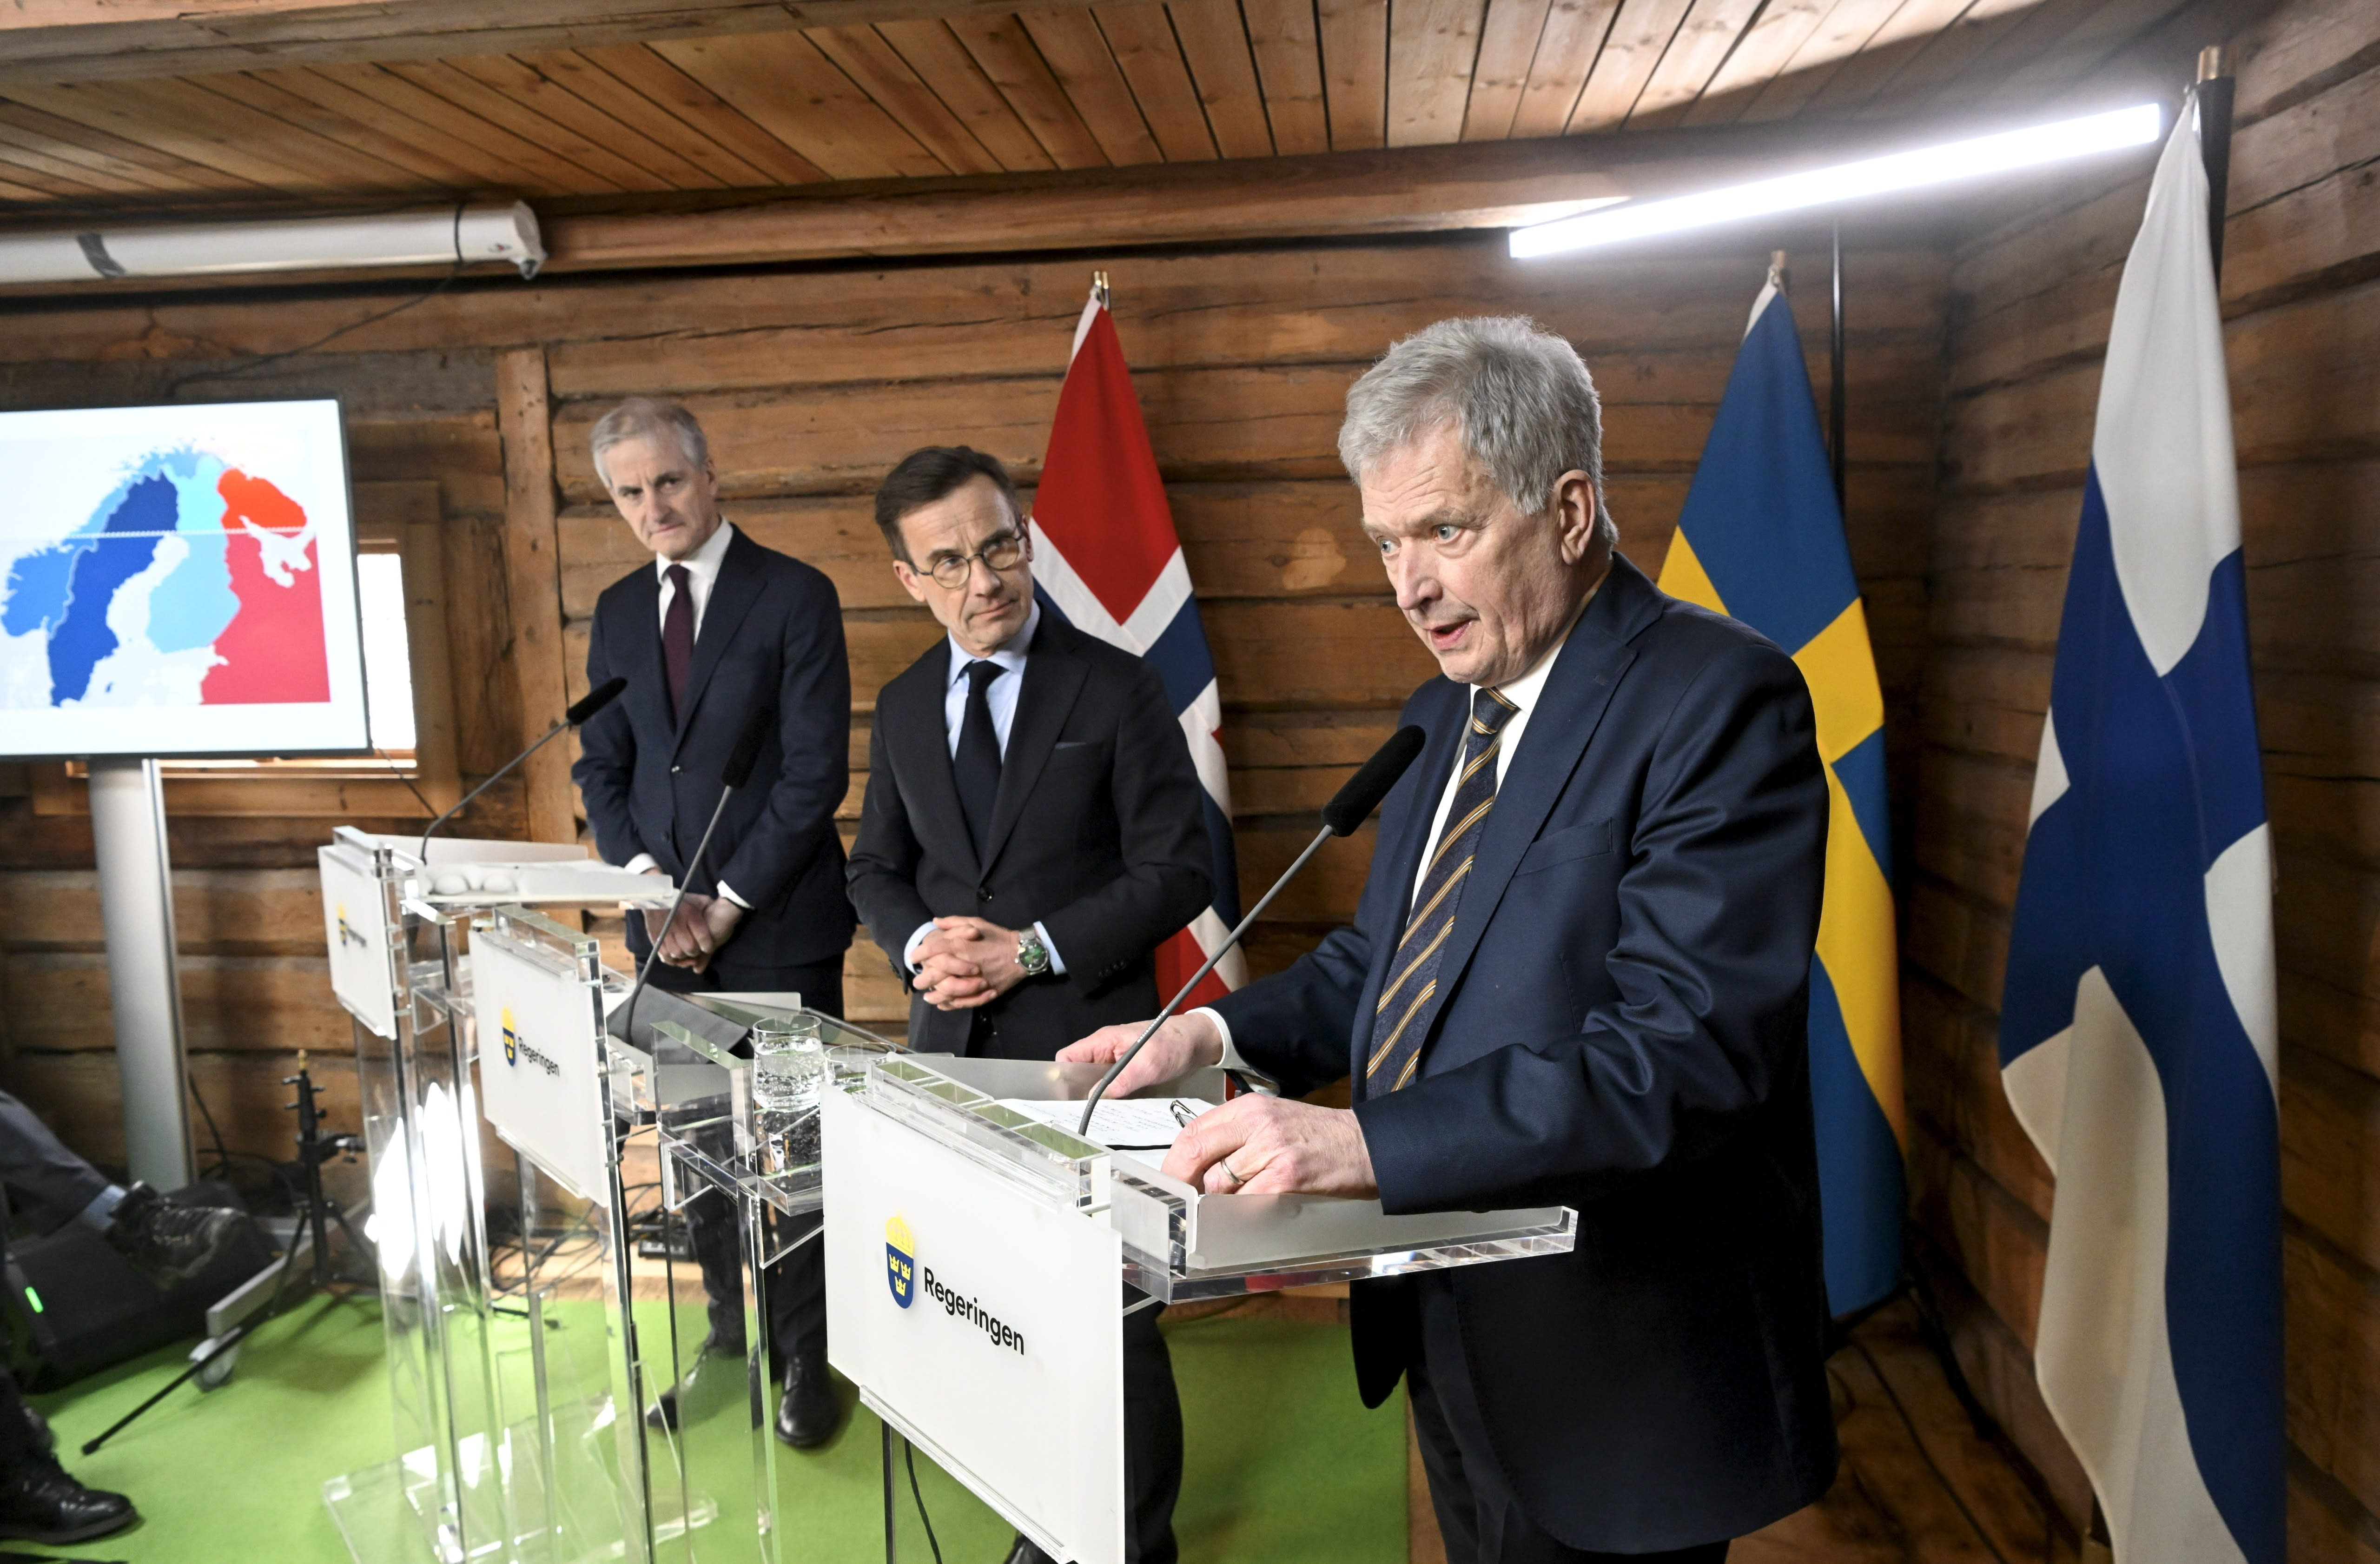 President Niinistö: Finland and Sweden want to join NATO “as soon as possible”